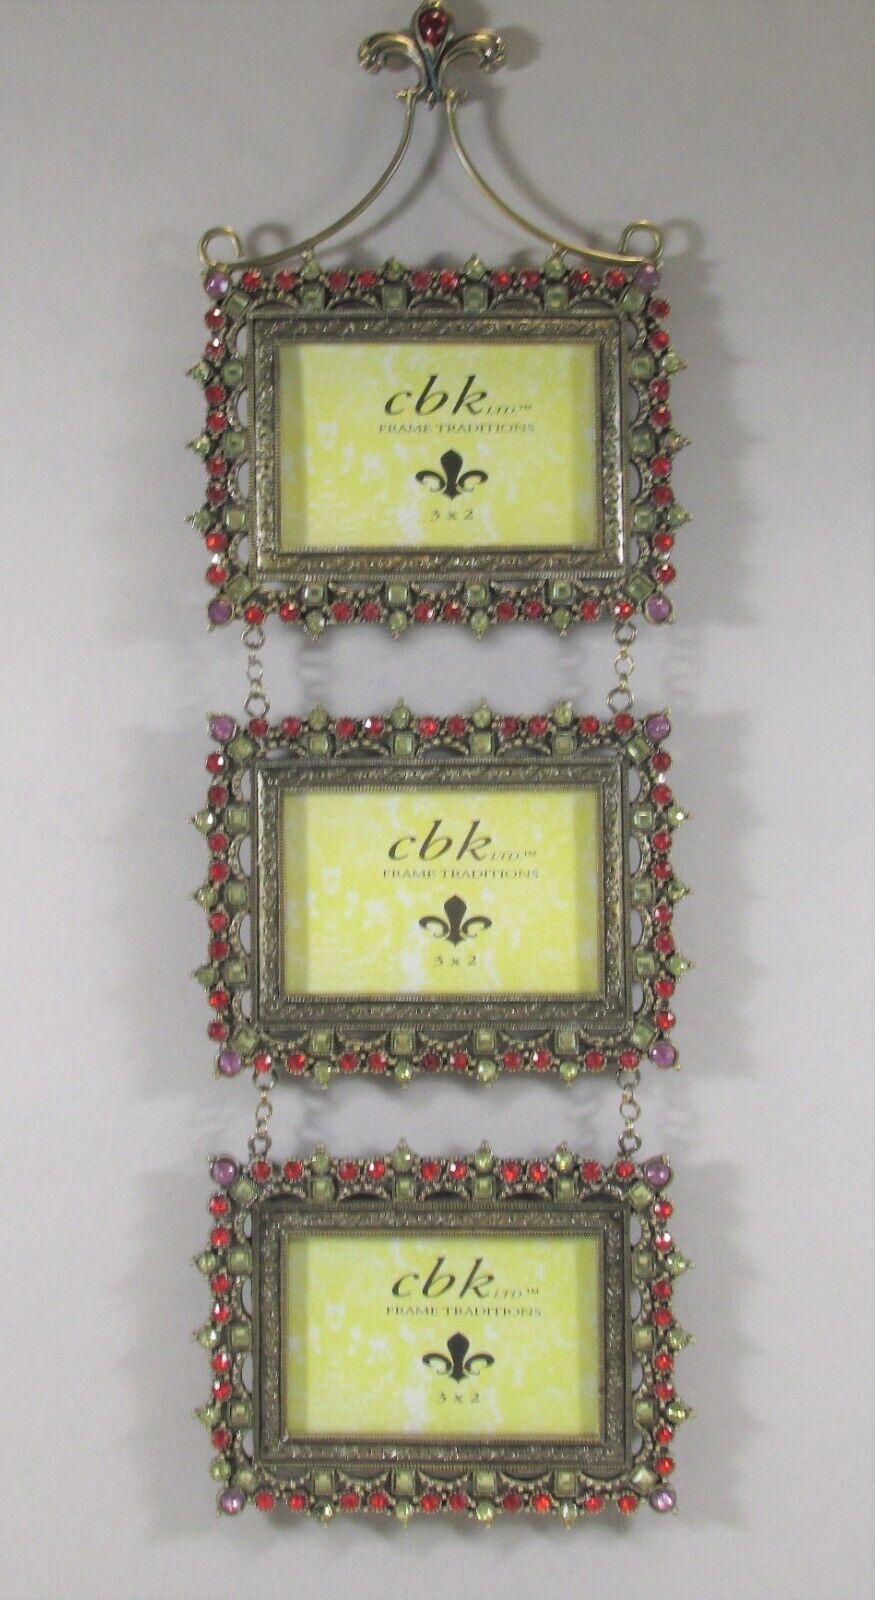 Set of 3 Attached CBK Frame Traditions Wall Photo Frames with Colorful Gems